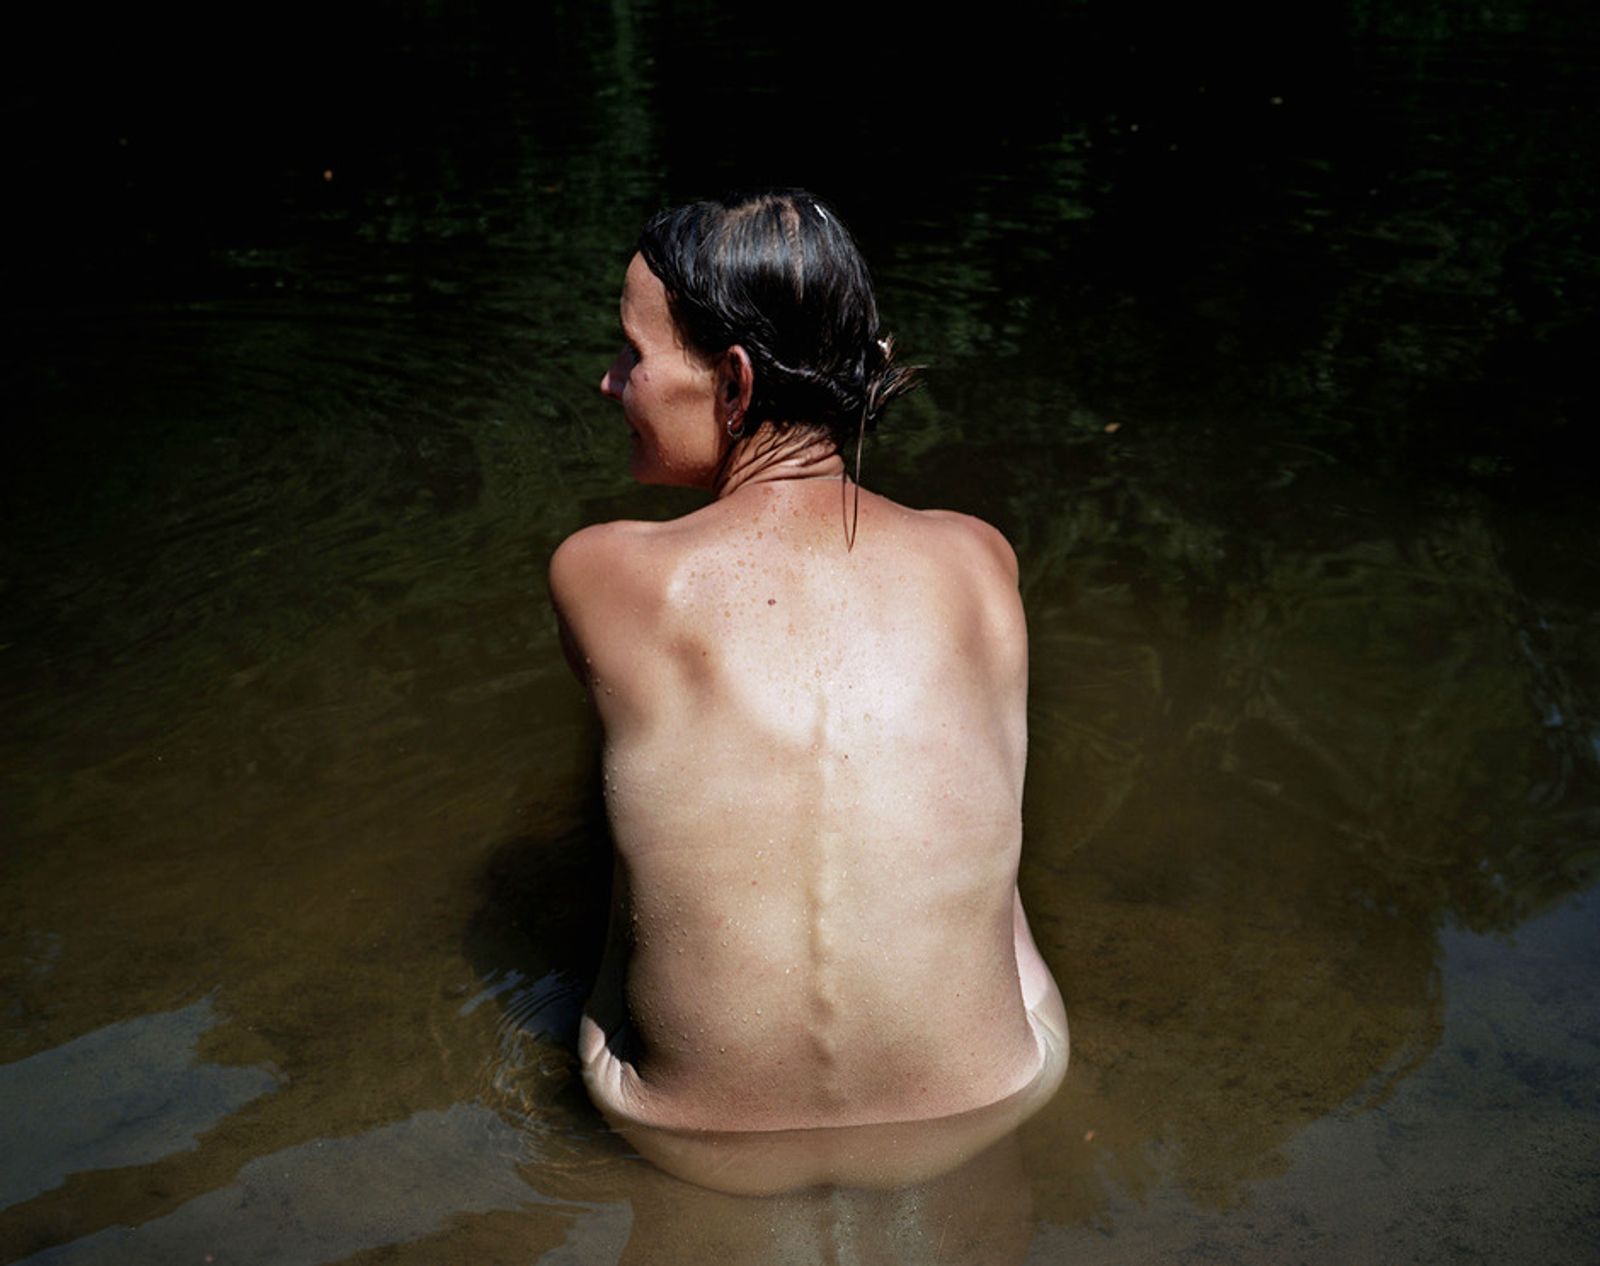 © Sian Davey - Image from the The River photography project